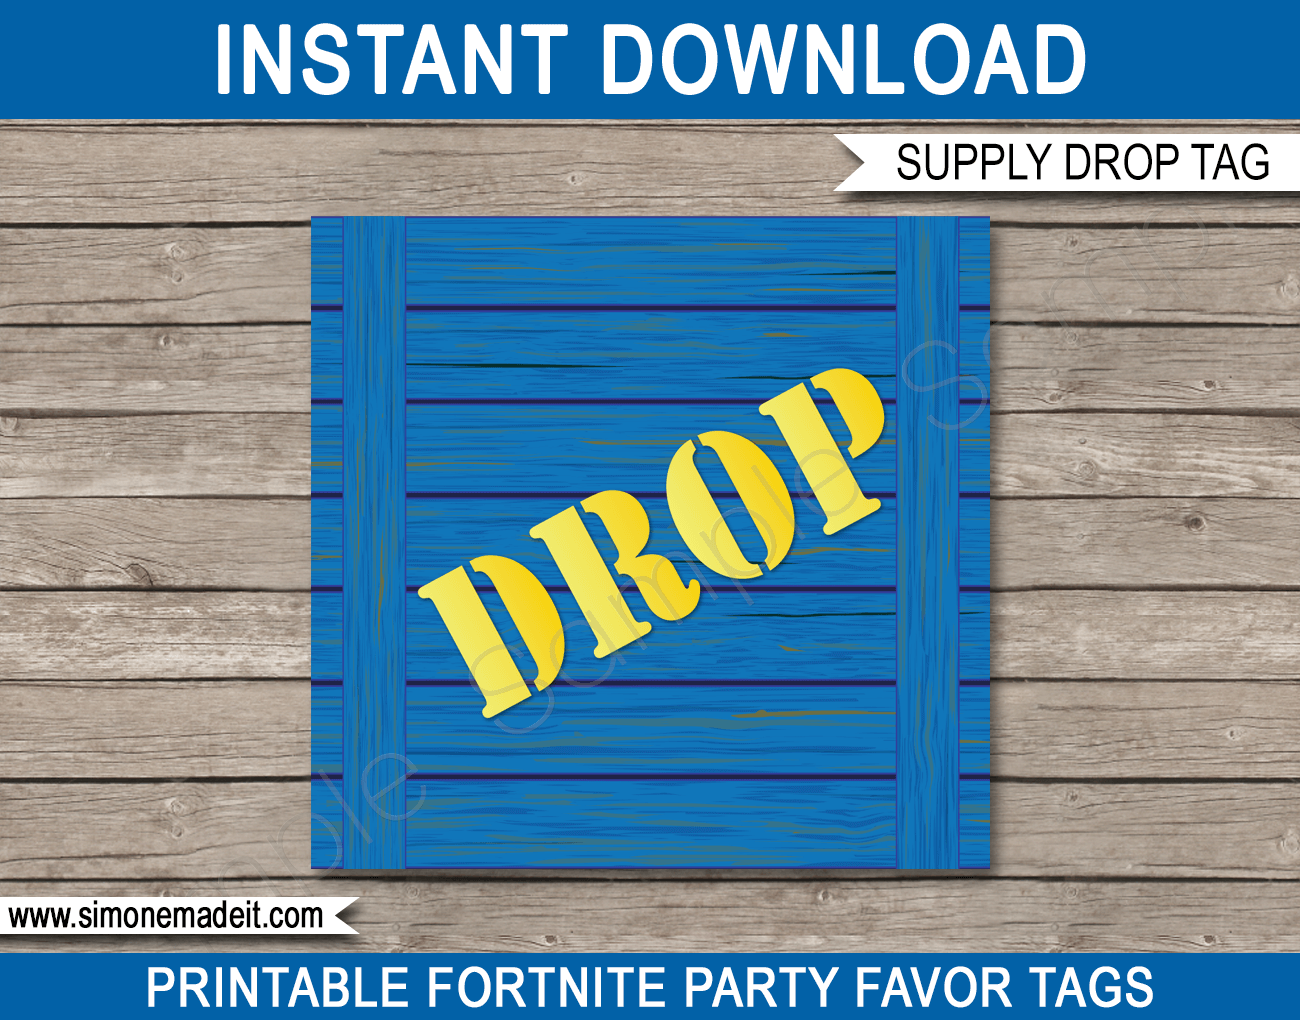 Printable Fortnite Supply Drop Party Tags | DIY Template | Fortnite Theme Party Decorations | Instant Download via simonemadeit.com